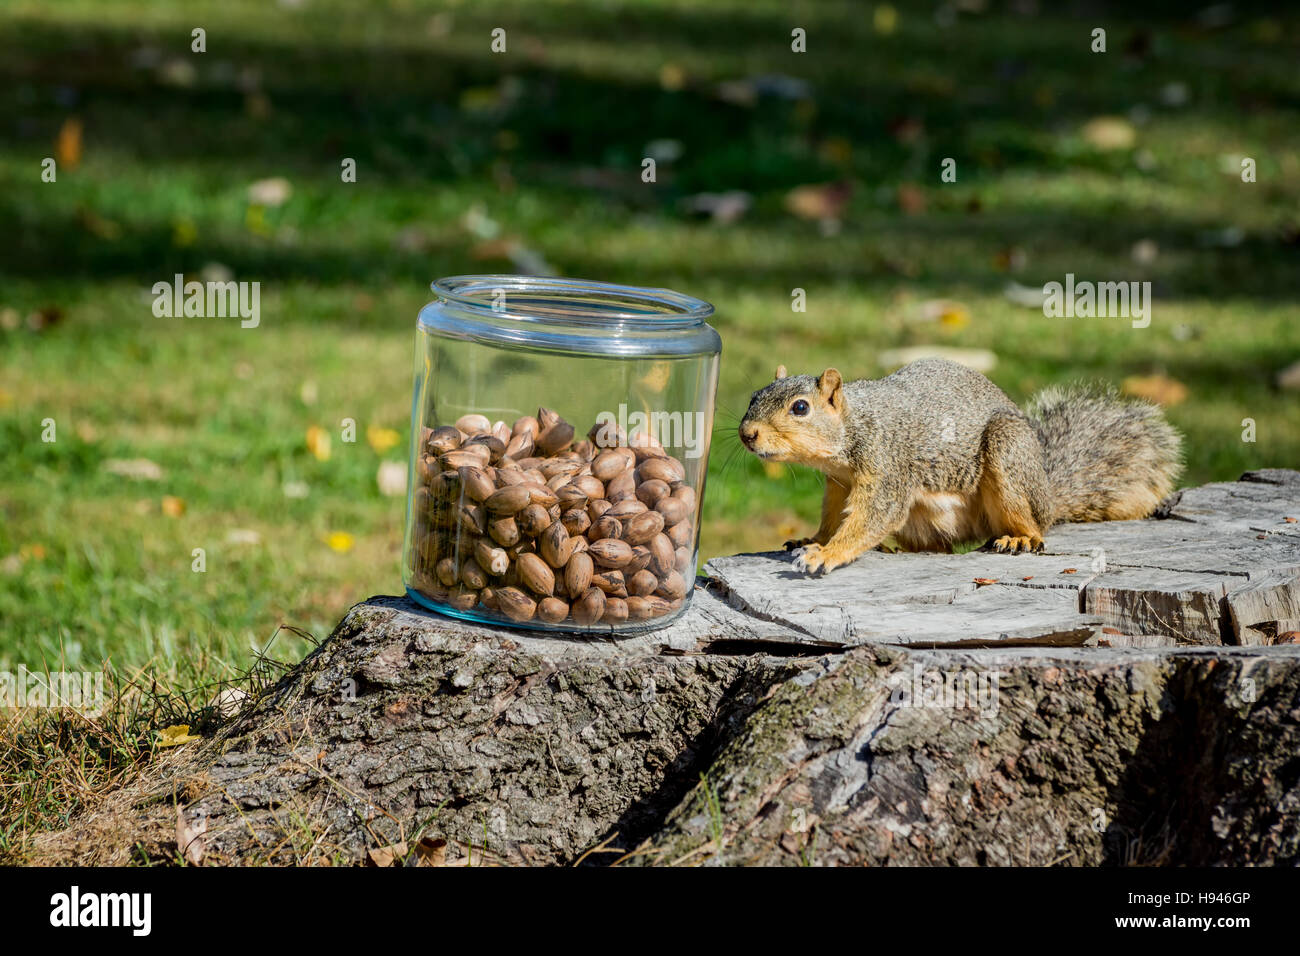 Eastern Fox Squirrel with a jar of nuts Stock Photo